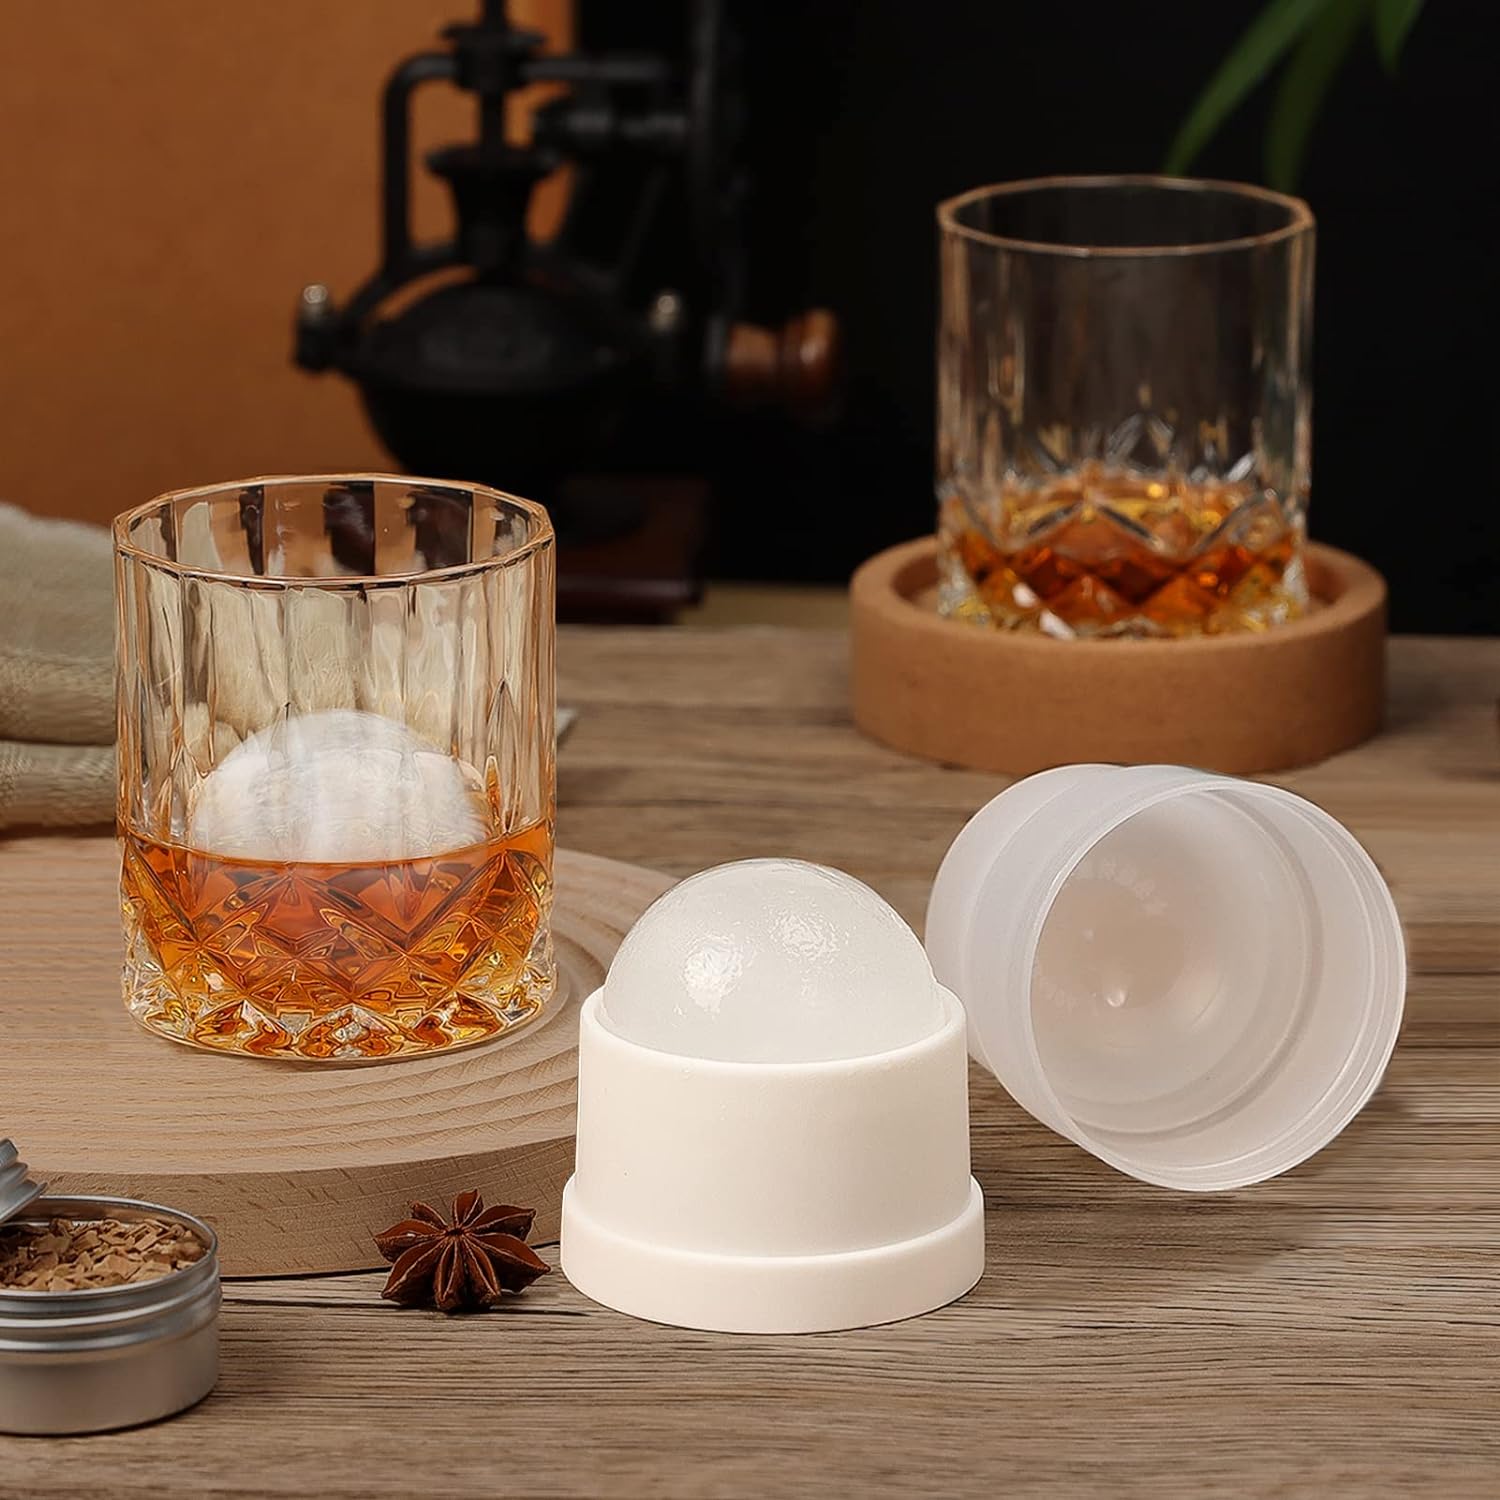 Whiskey Smoker Kit with Torch - 6 Flavors Wood Chips, 2 Glasses, 2 Ice Ball Molds - Cocktail Smoker Infuser Kit, Old Fashioned Drink Smoker Kit, Birthday Bourbon Whiskey Gifts for Men,Dad(NO Butane)